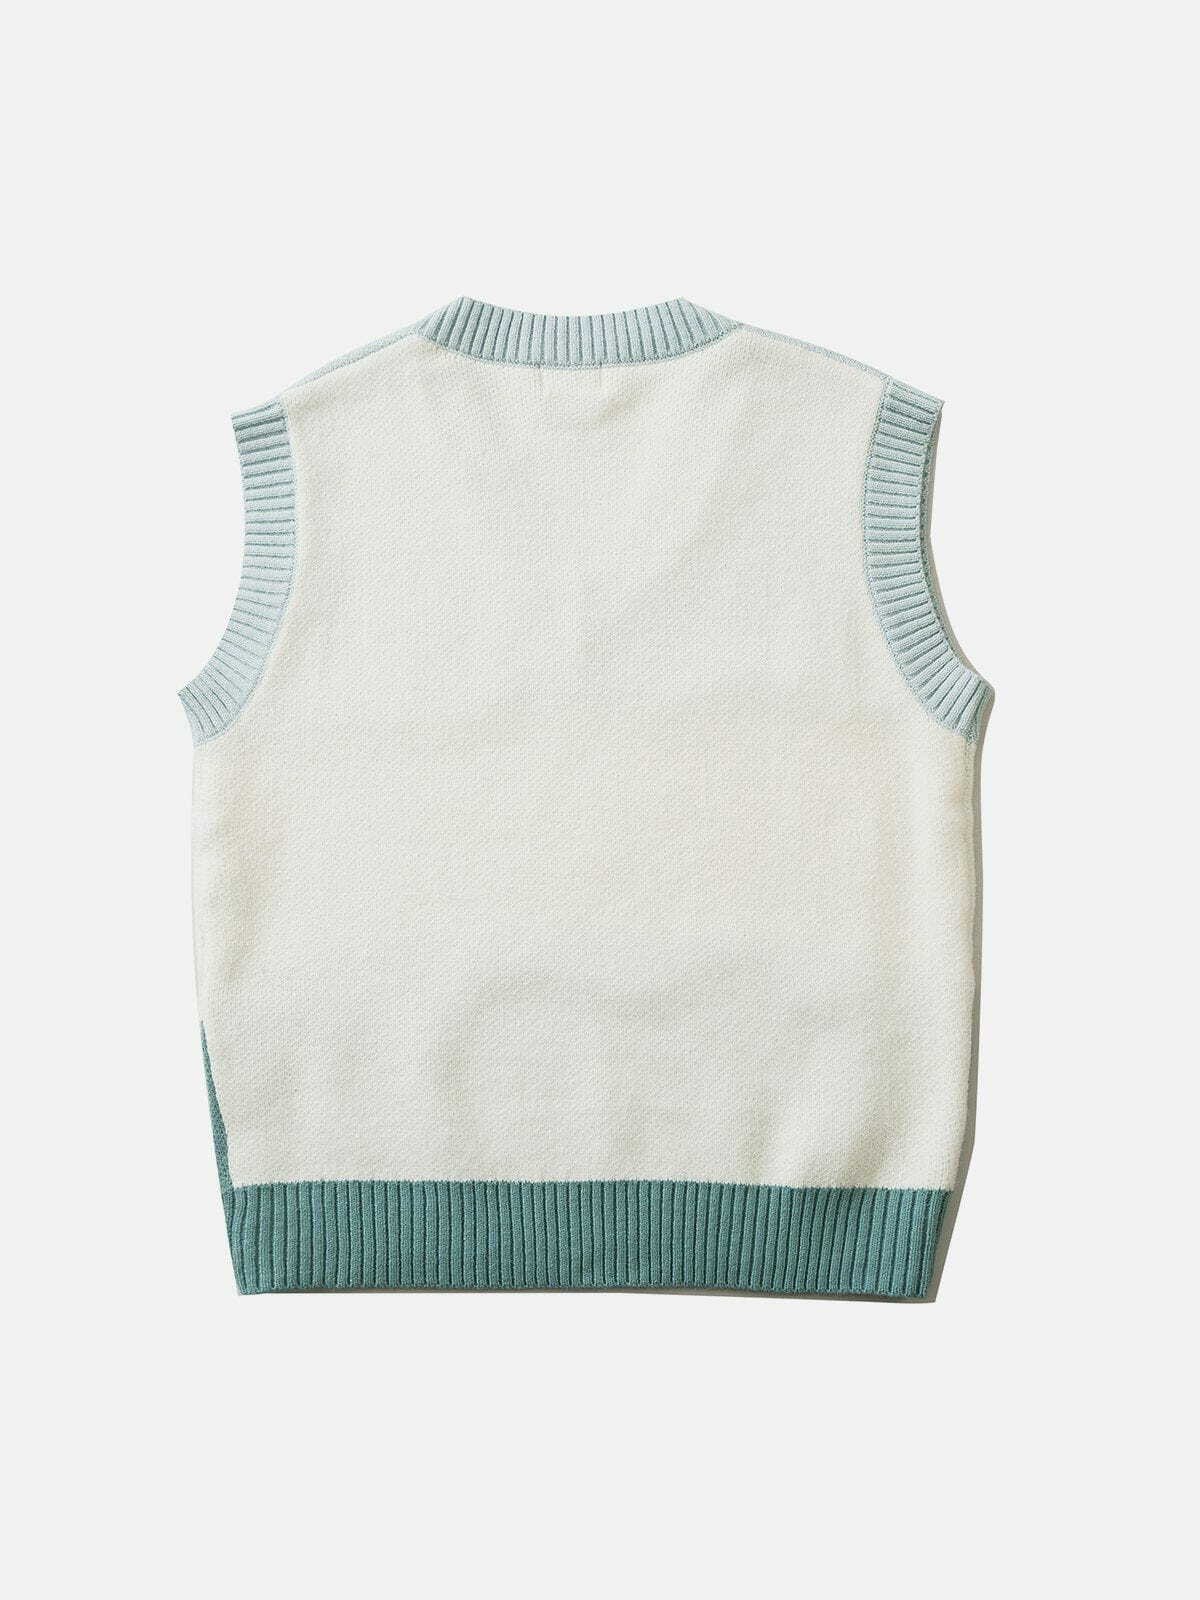 tricolor stitching sweater vest edgy y2k streetwear essential 6364